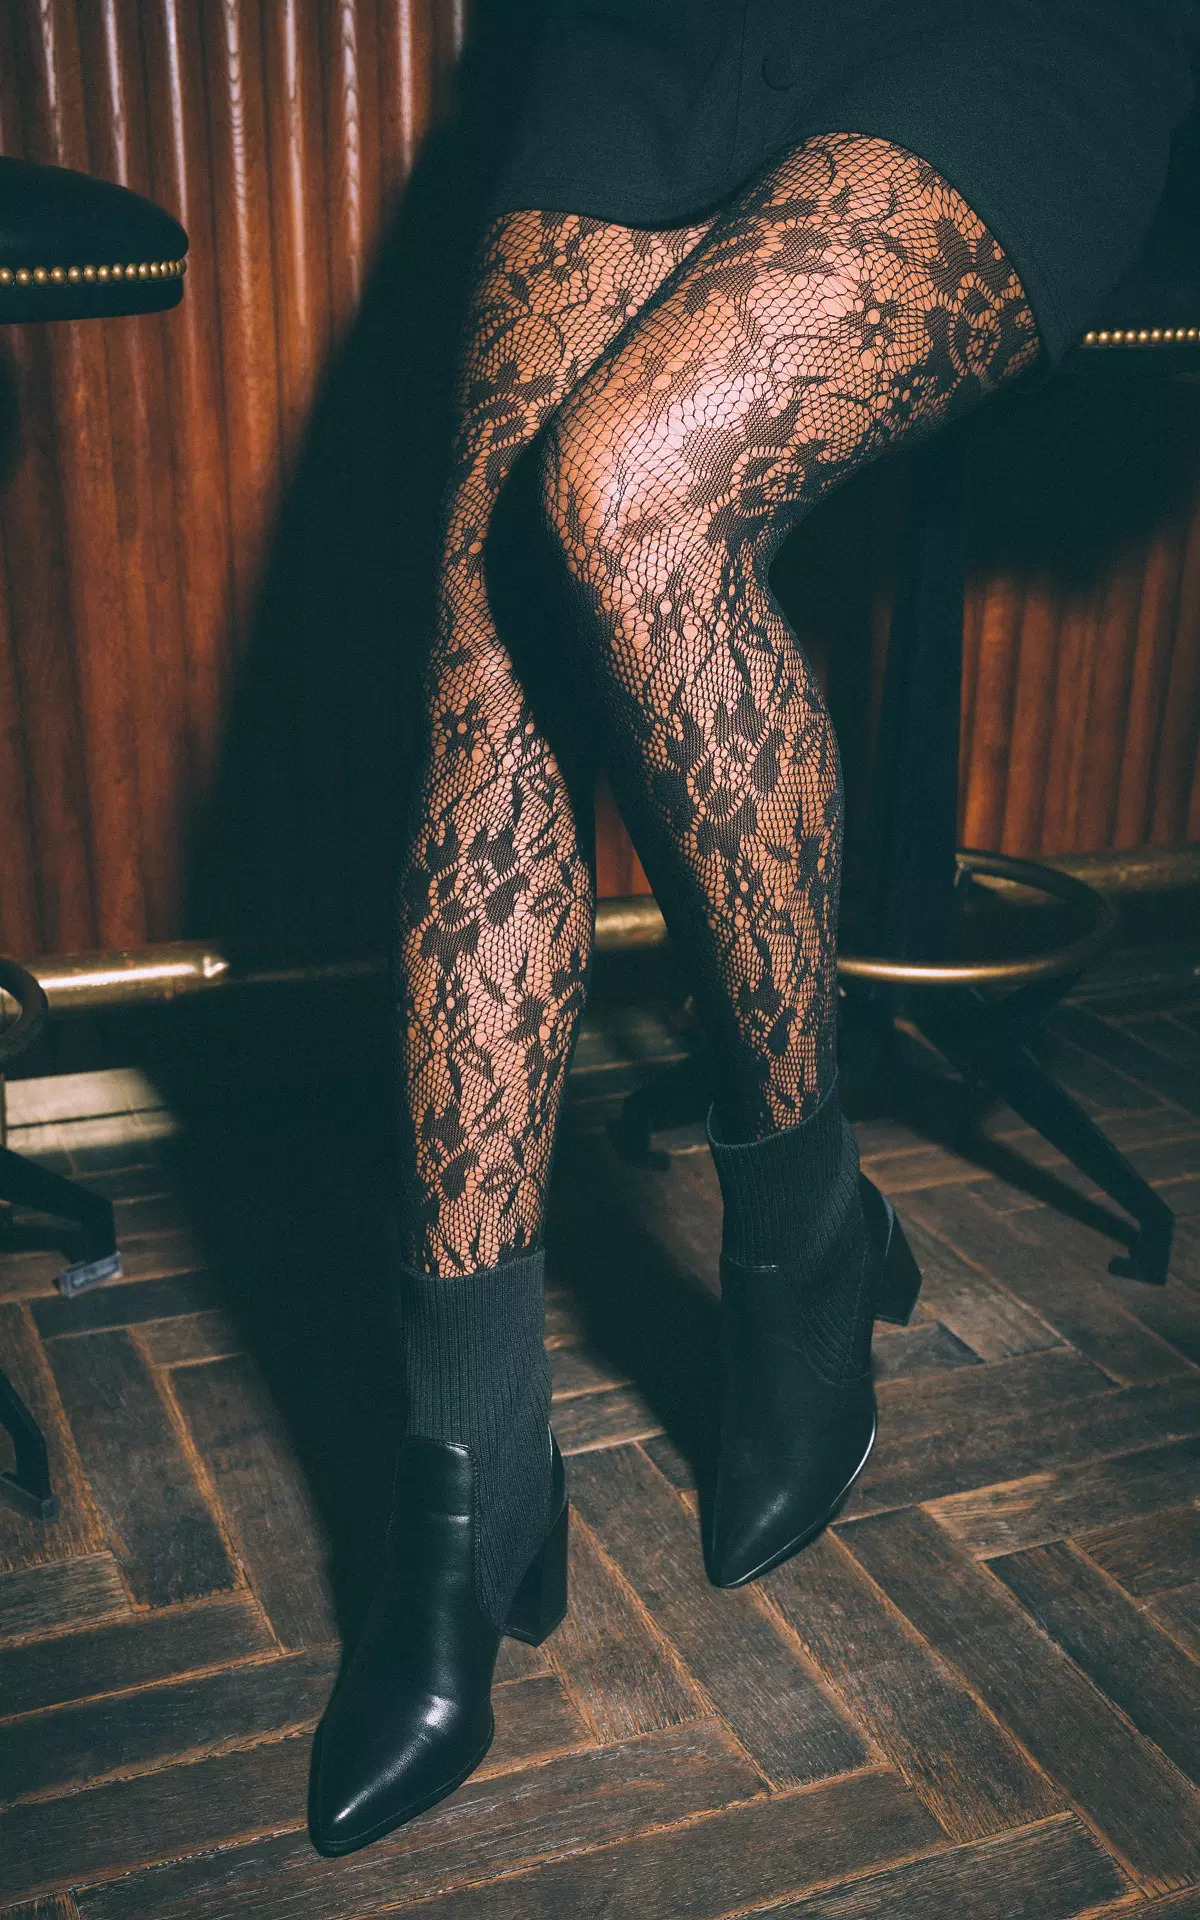 Patterned tights - Black, Guts & Gusto